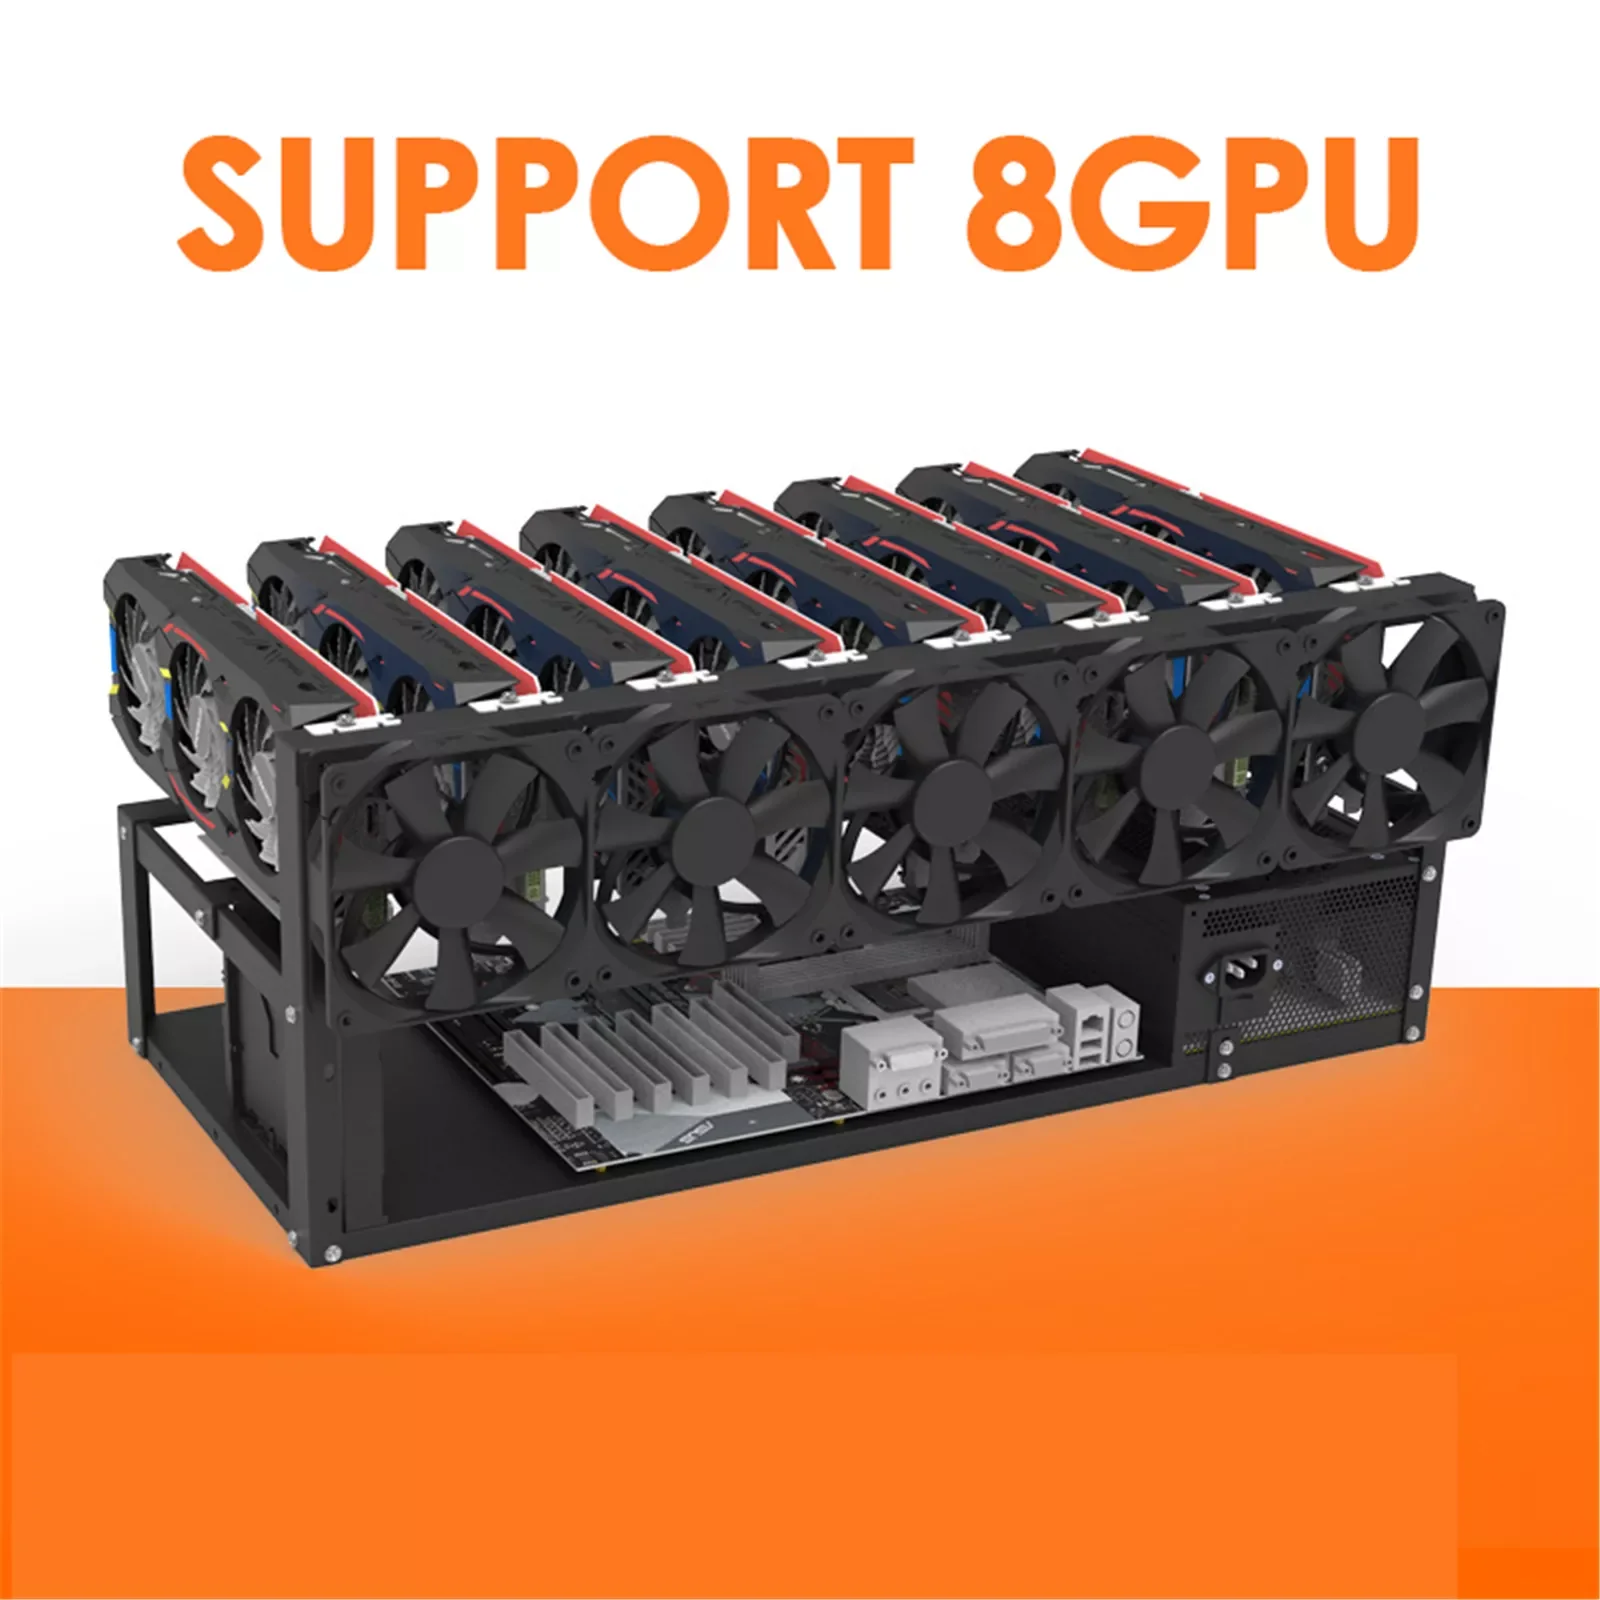 Open Mining Machine Frame Mining Rig Frame Case Graphics Card Bracket Holds 8GPU Mining for Crypto Coin Currency Bitcoin Mining